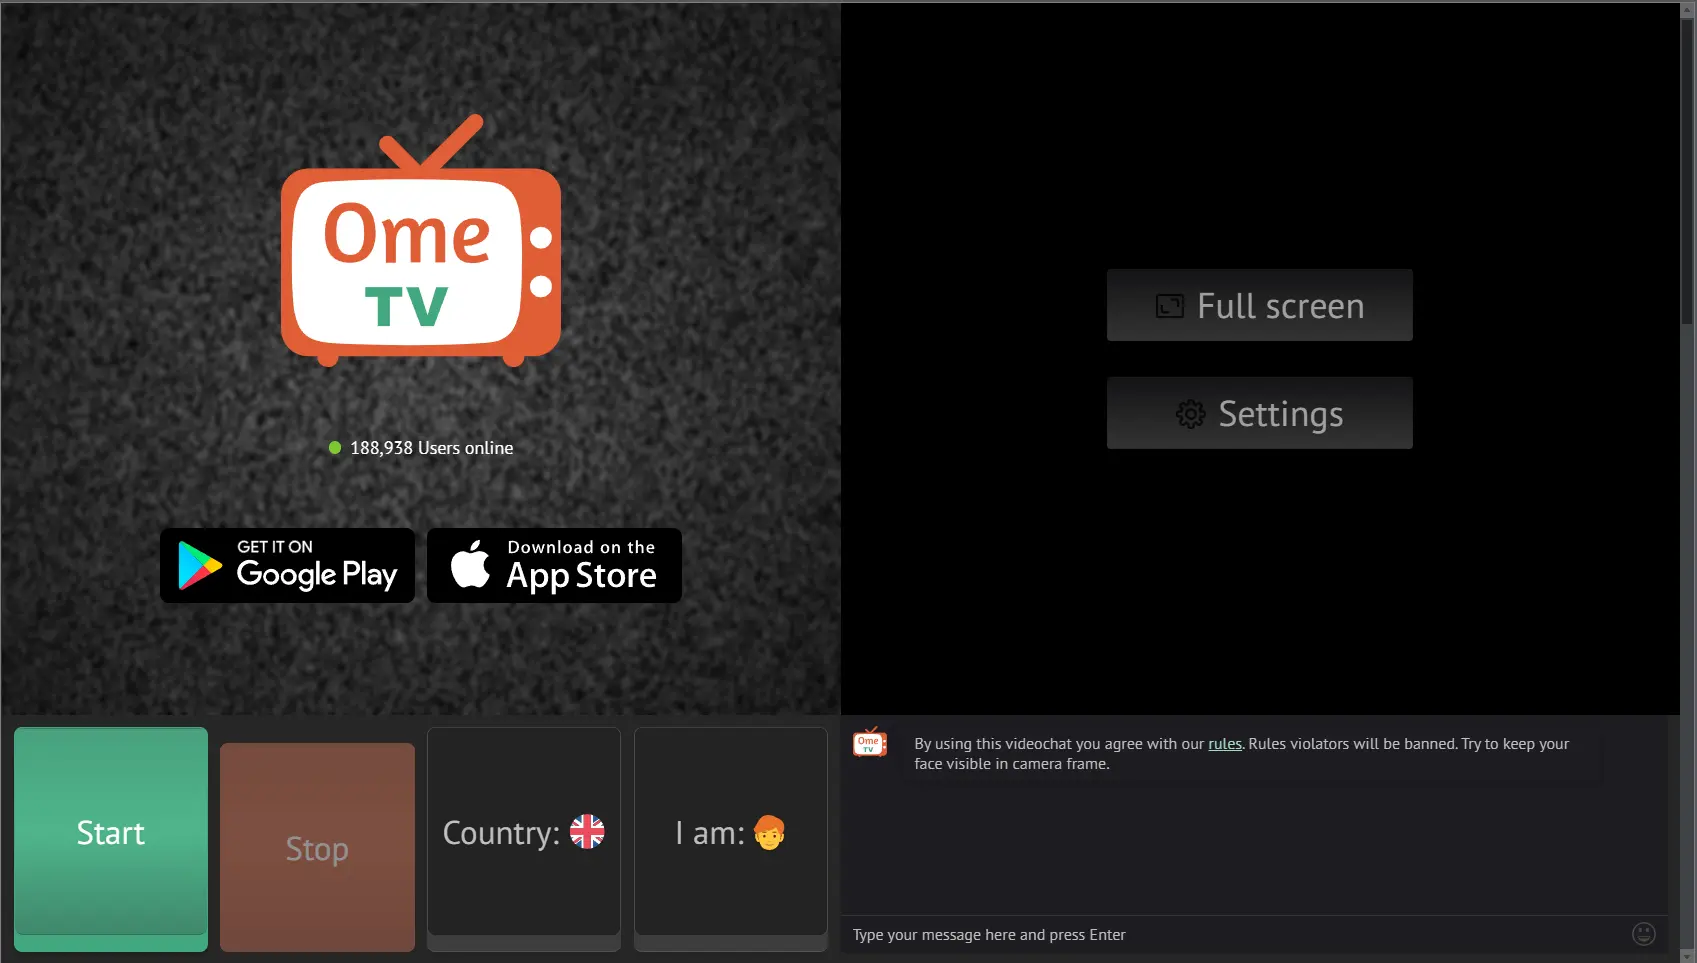 How to delete Ome TV account